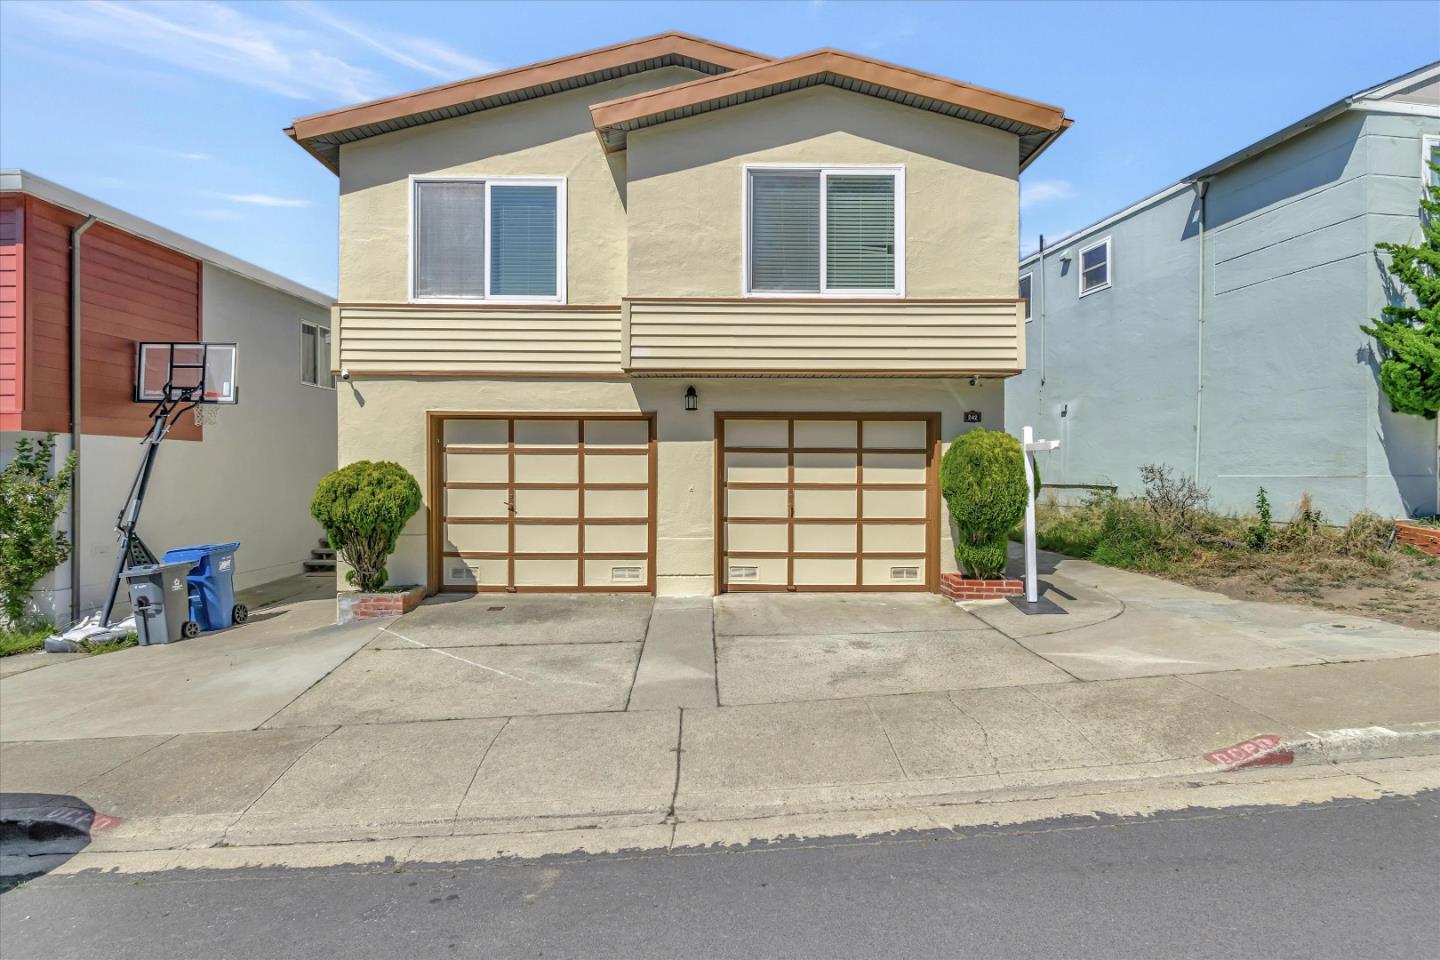 LOCATION! LOCATION!!LOCATION!!! This charming move-in ready home is nested in Southern Hills, bordering Daly City and San Francisco. Enjoy the panoramic views of San Francisco & Bay from the picture window in your living & dining room. Newly remodeled open floor plan with 3 beds, 2 baths, living/dining room, kitchen on the main level, full of natural lights. Extended downstairs consists of a legal family room, 2 beds and 1 full bath all permitted. Other renovated features include Dual Pane Windows, Recessed Lighting, Stainless Steel Appliances, newly polished hardwood floor, newly painted interiors, and owned solar panels. Two side-by-side garages with washer & dryer. Hiking and biking at nearby San Bruno Mountain State & County Park. Minutes away from San Francisco, easy freeway access to I-101 & I-280, close to Daly city BART and public transportation. Less than 20 minutes driving to the SF Financial District. Don't miss this rare opportunity! Come to check it out!